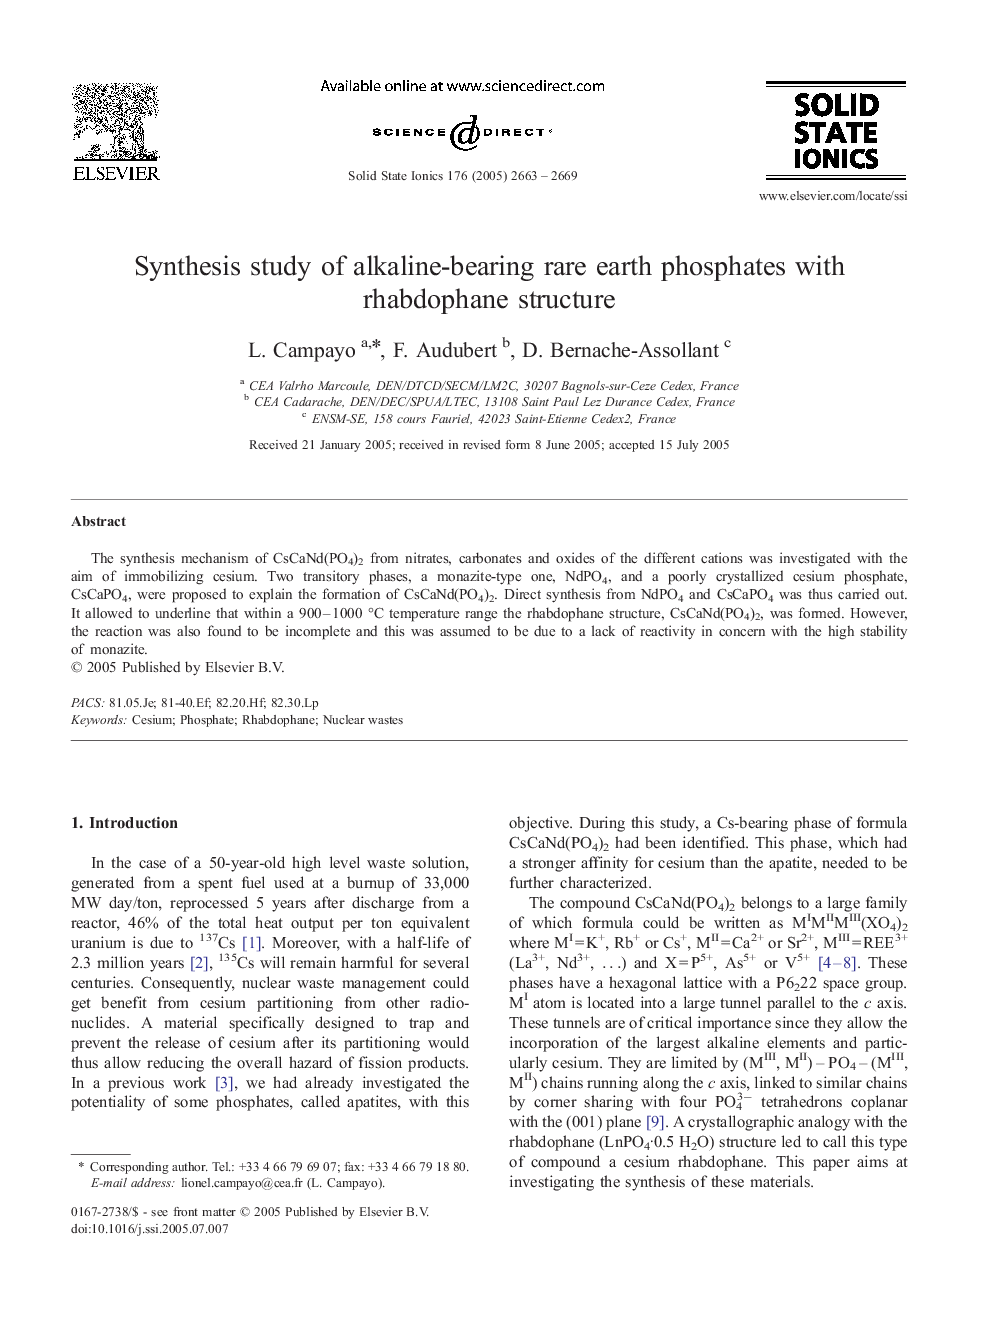 Synthesis study of alkaline-bearing rare earth phosphates with rhabdophane structure